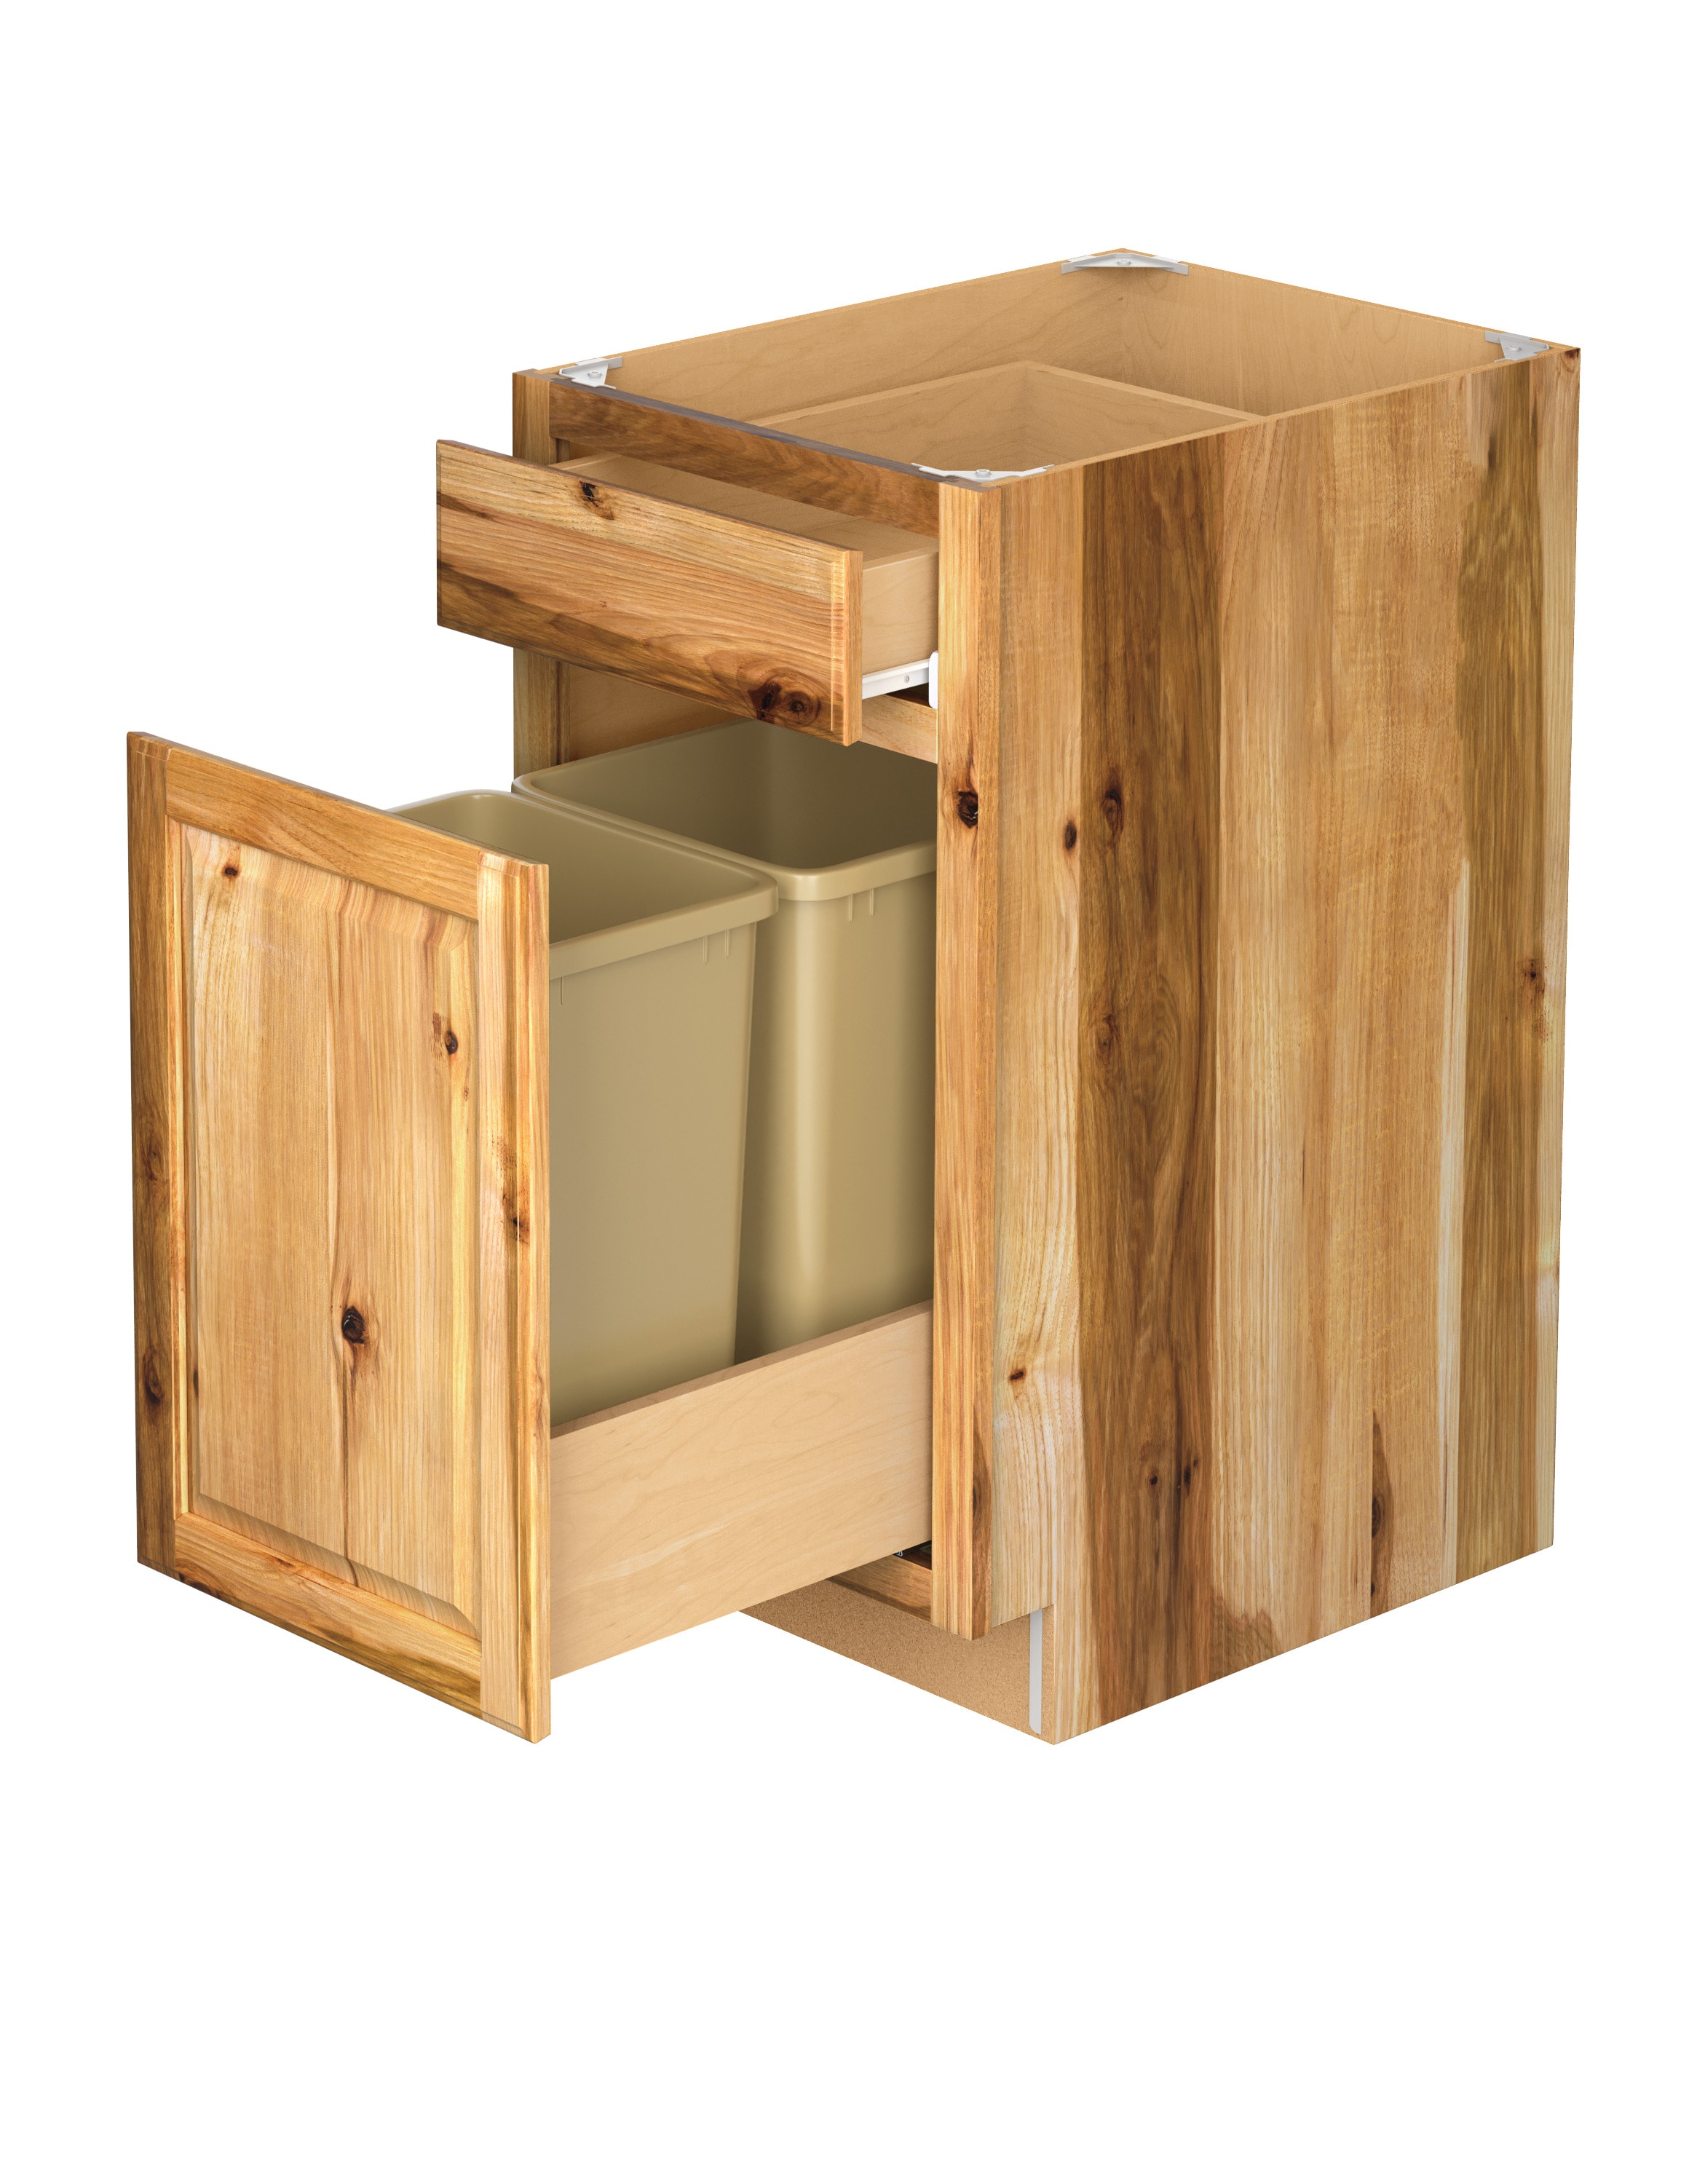 Diamond at Lowes - Organization - Vanity Grooming Pull Out Cabinet